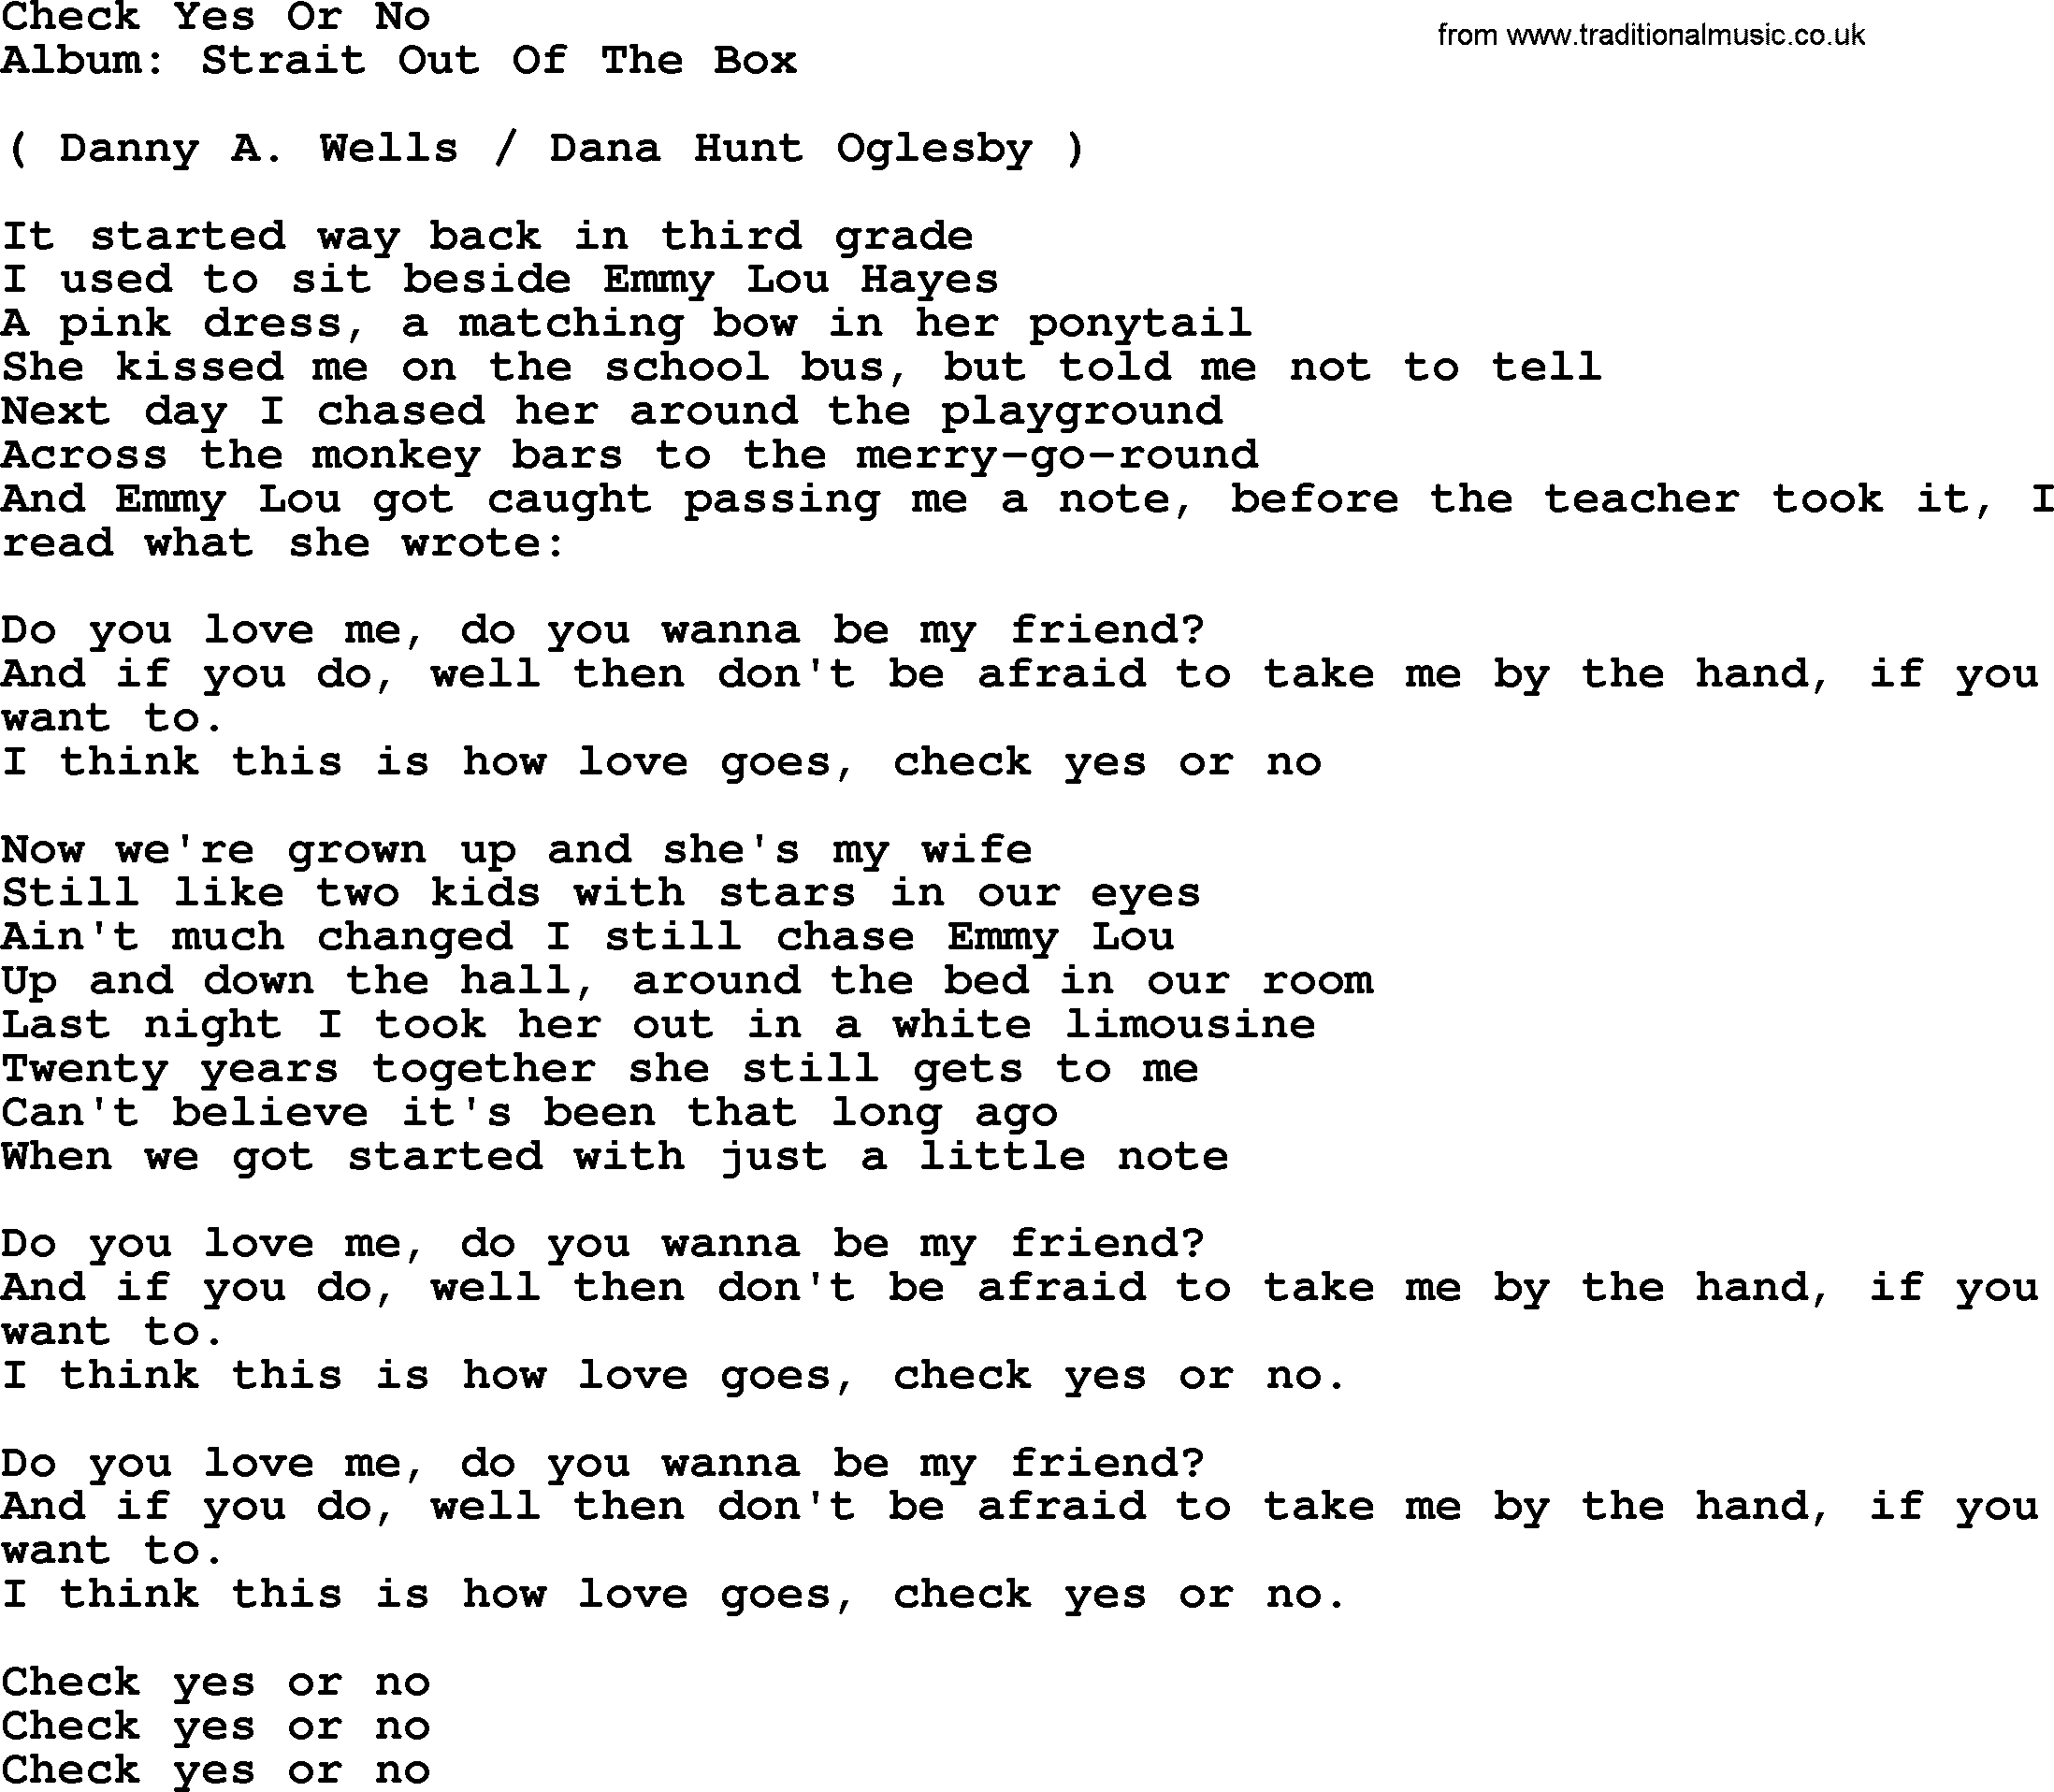 George Strait song: Check Yes Or No, lyrics